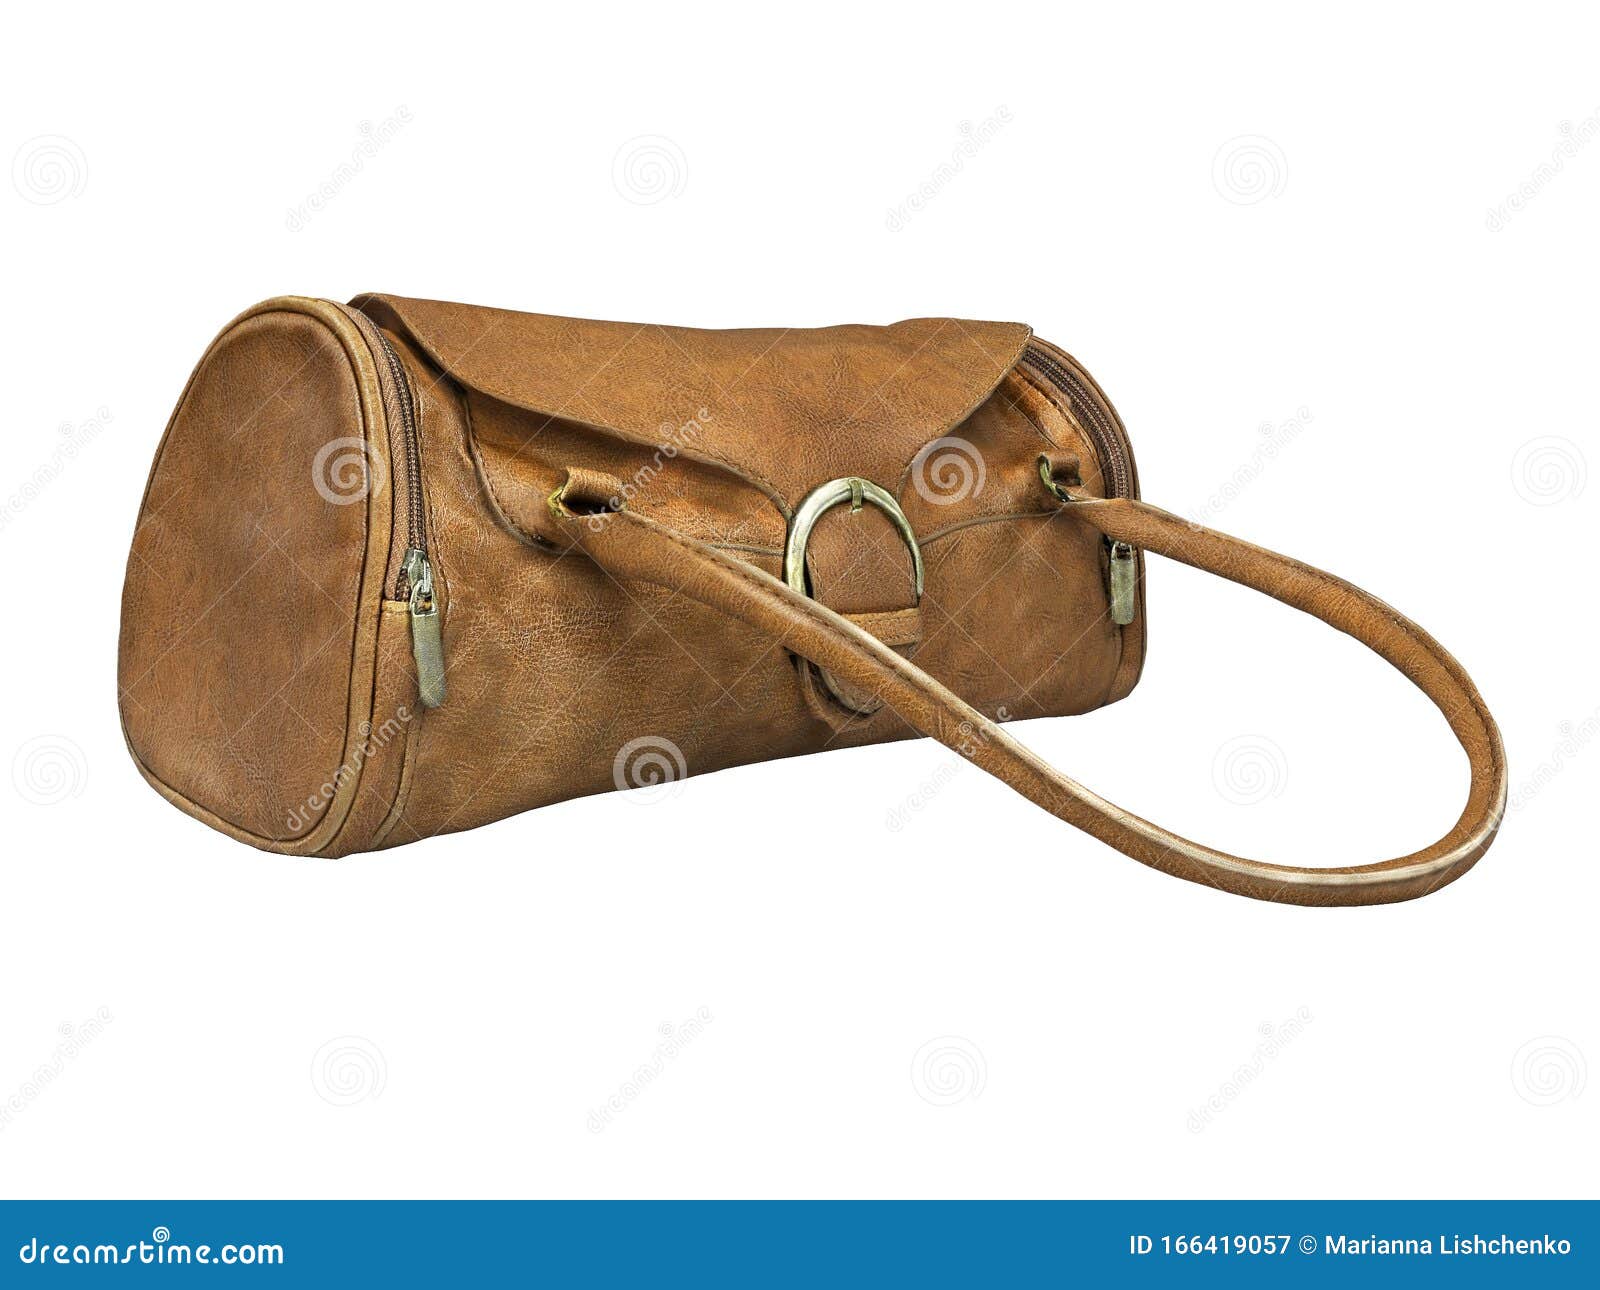 Small Leather Bag with Short Two Handles 3D Rendering on White Background  No Shadow Stock Illustration - Illustration of female, clutch: 166419057